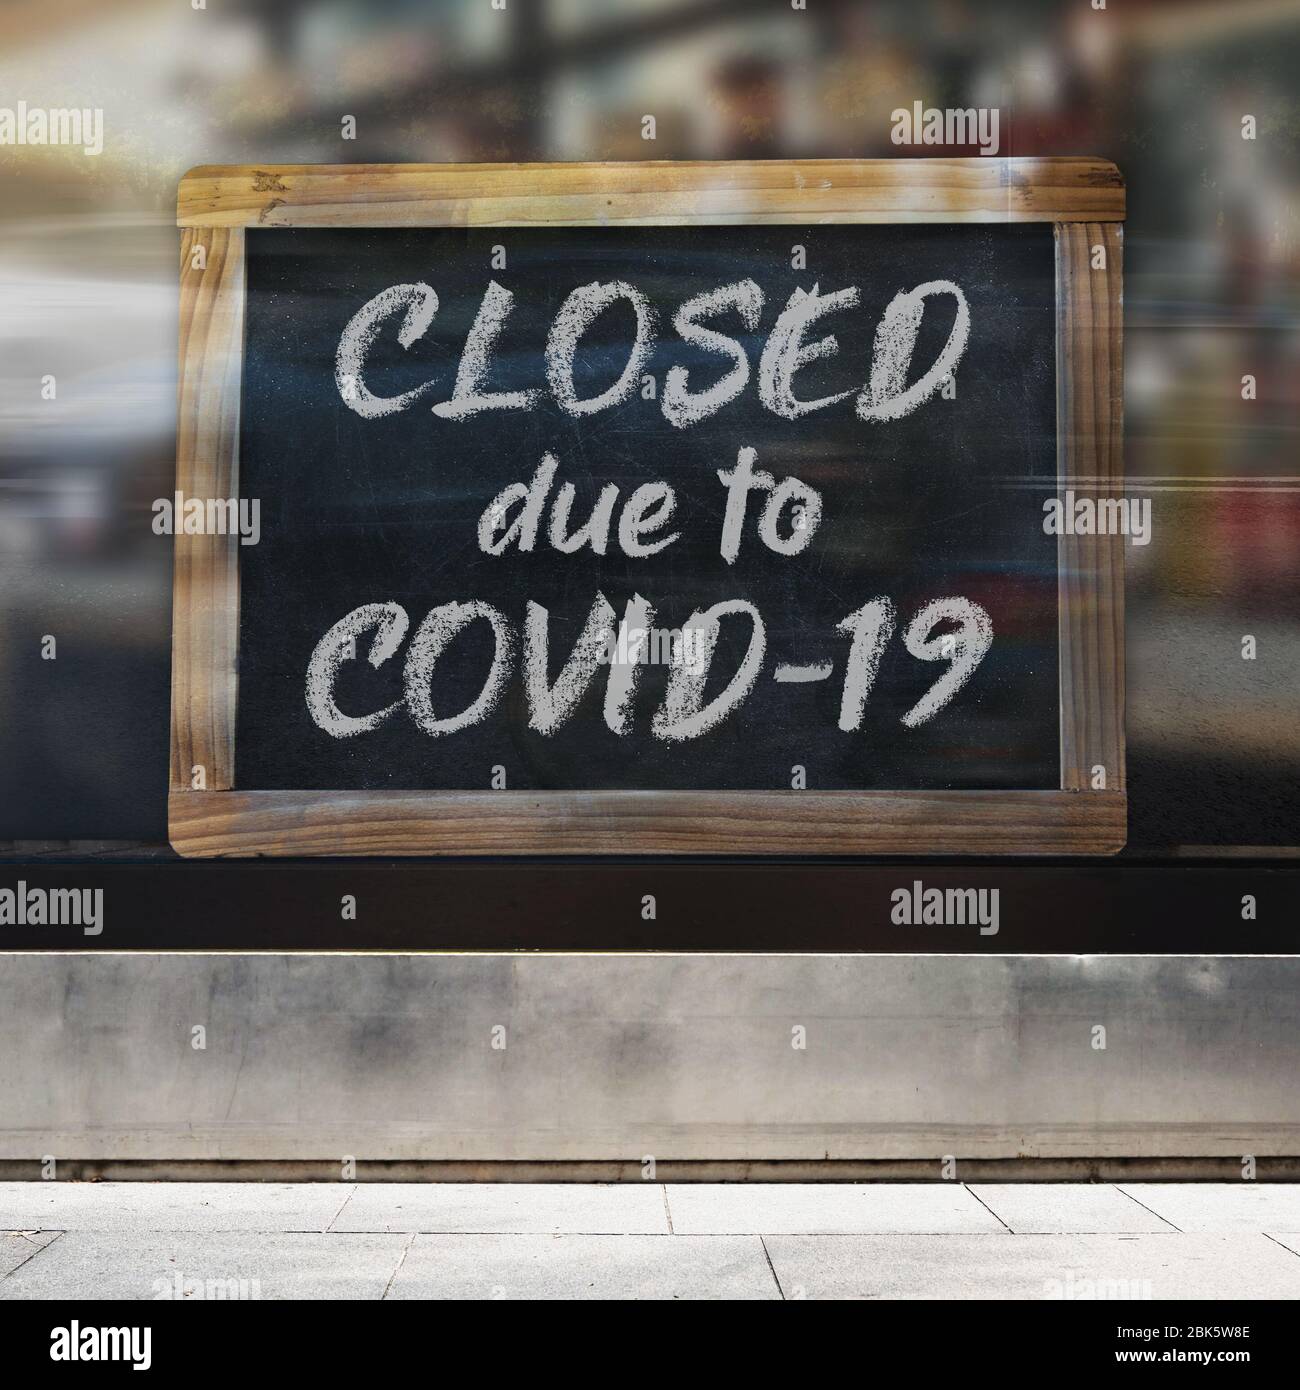 An illustrative image of business sign concept that says ‘Closed due to Covid-19’ on a store / restaurant window. Stock Photo